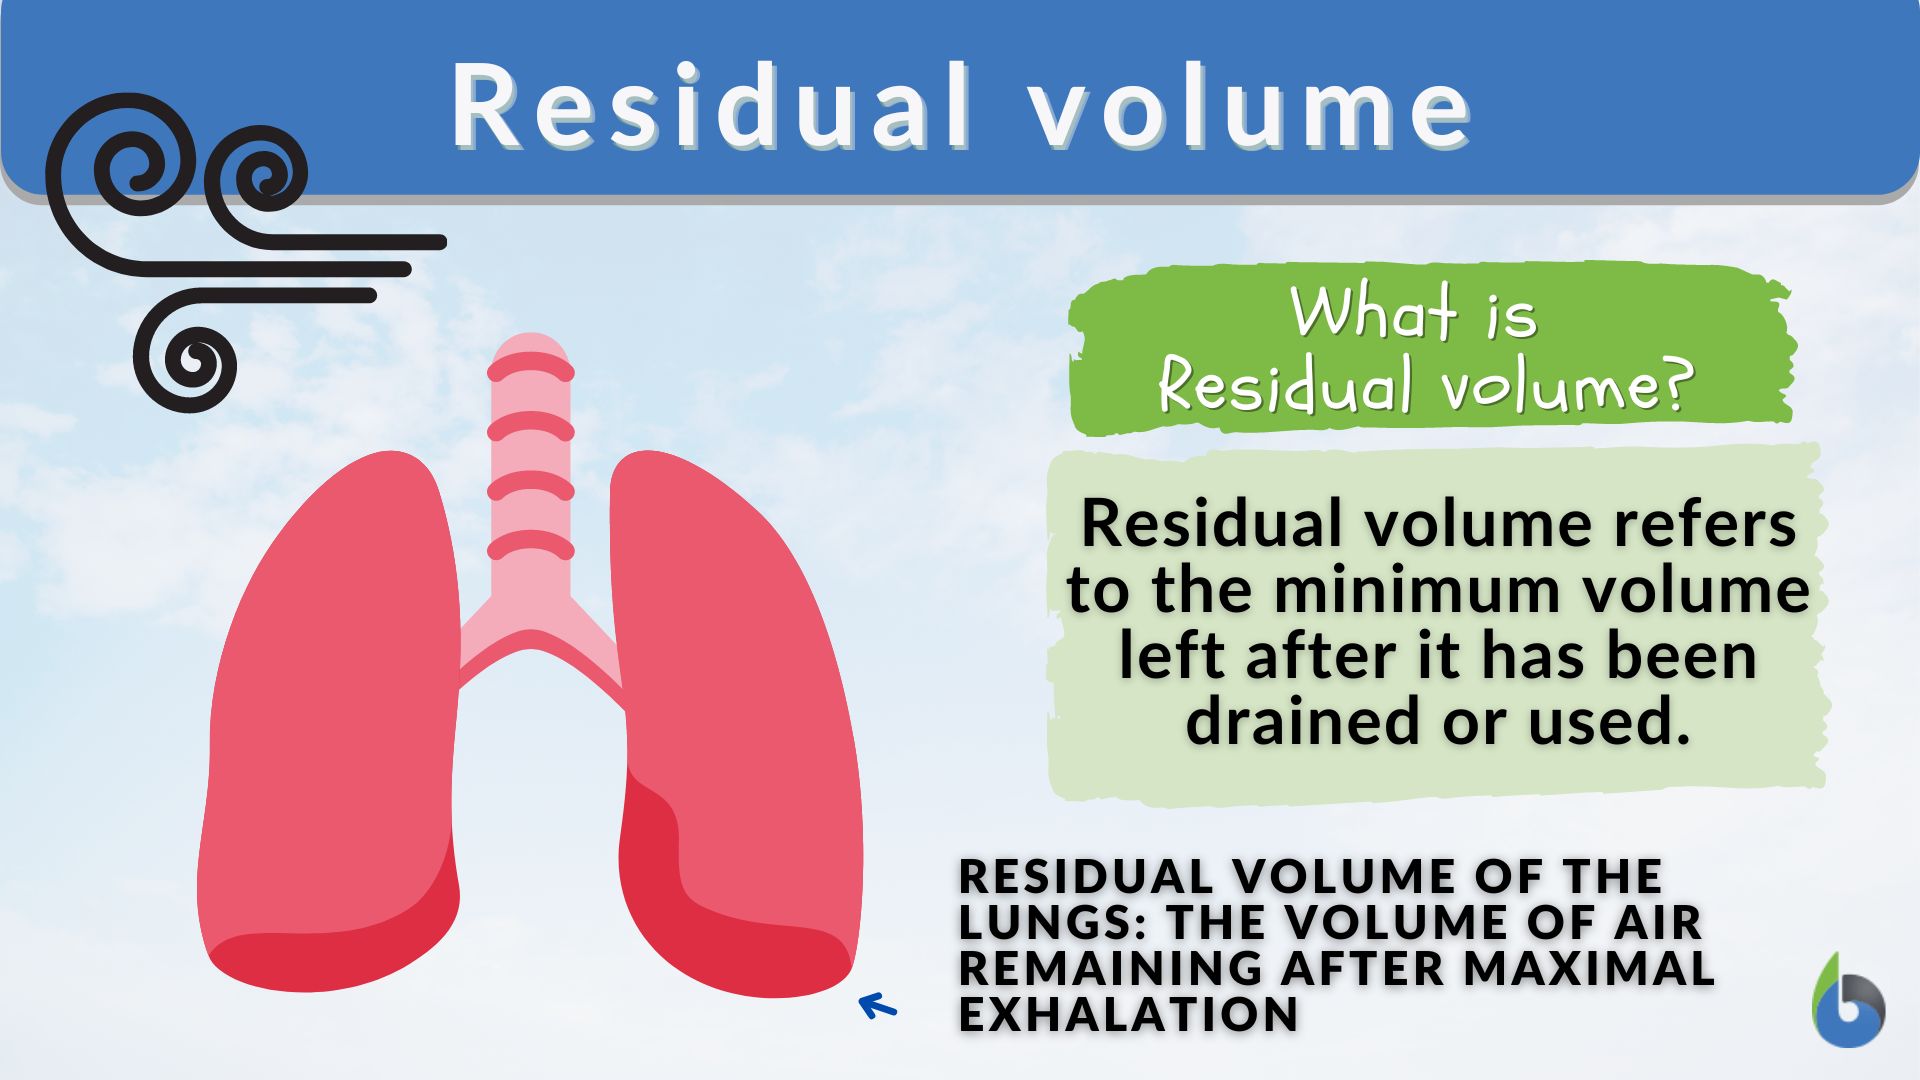 Is residual volume a synonym for dead space volume? If not, then why?